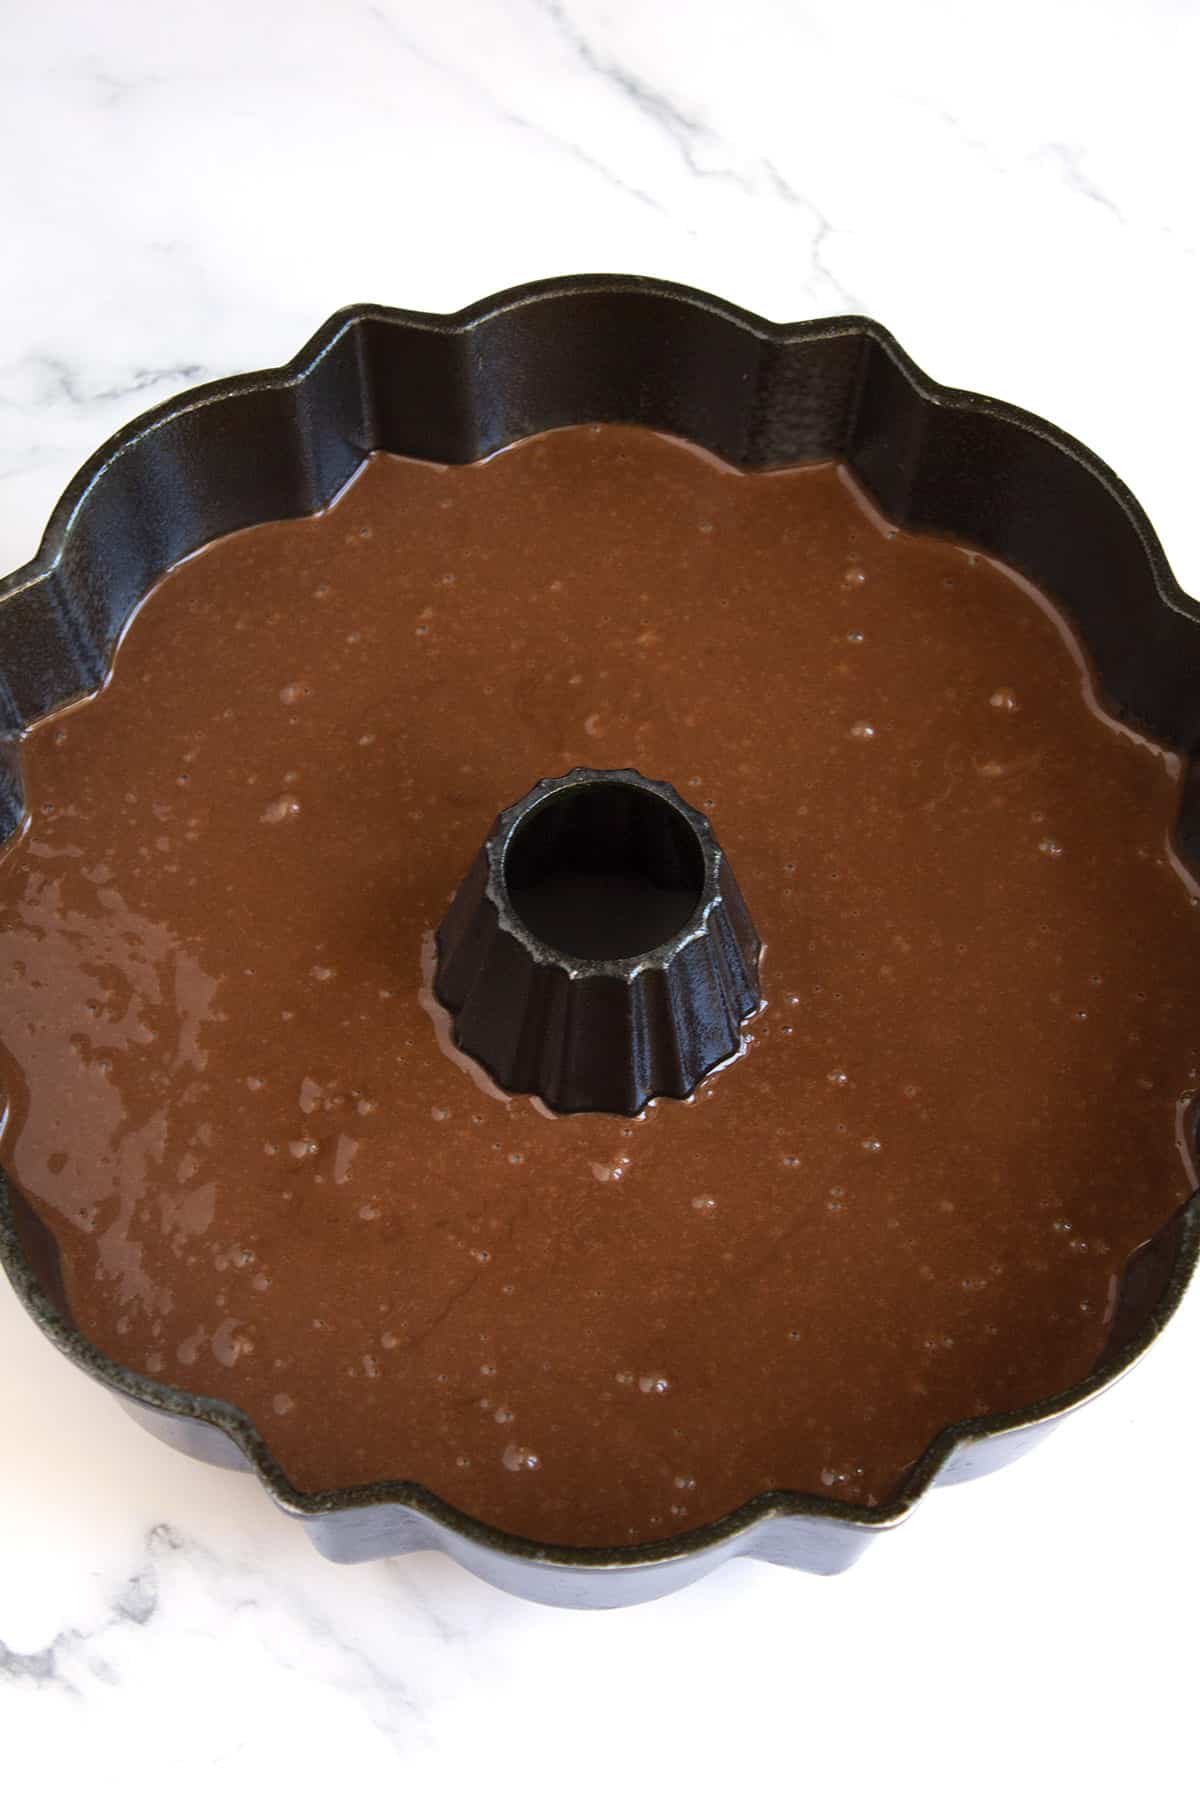 Chocolate cake batter in a bundt cake pan on the counter.